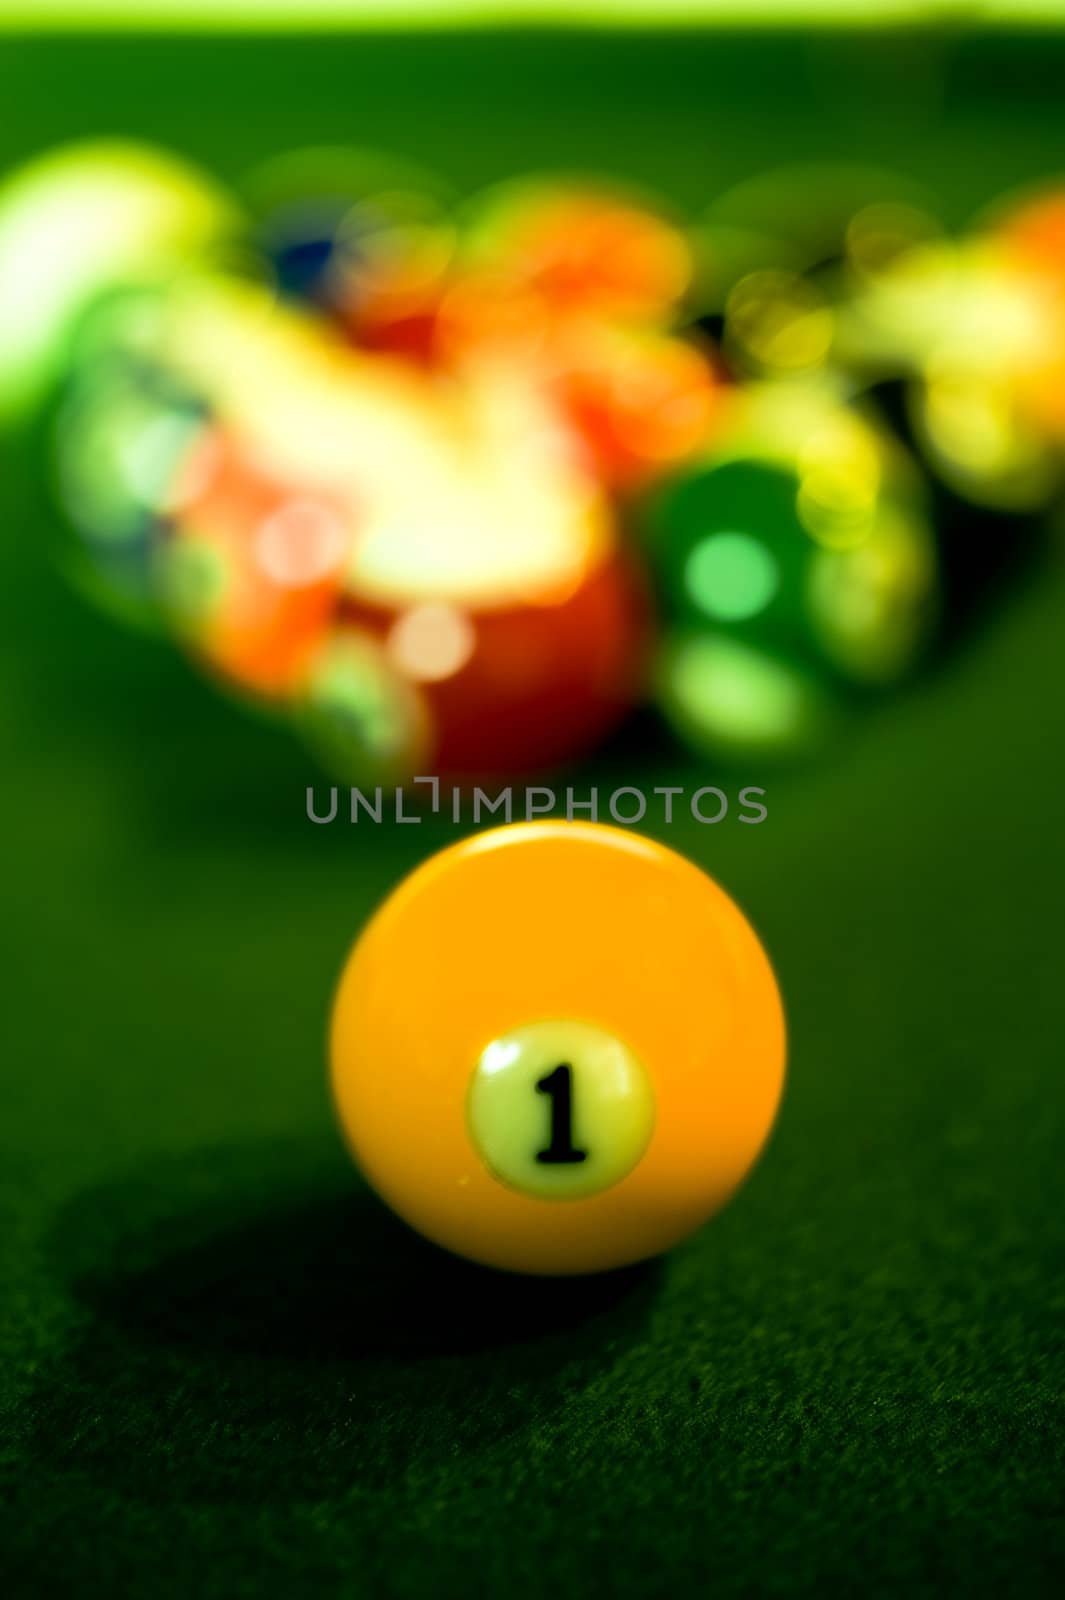 Close-up shot of a billiard balll on a green felt covered pool table